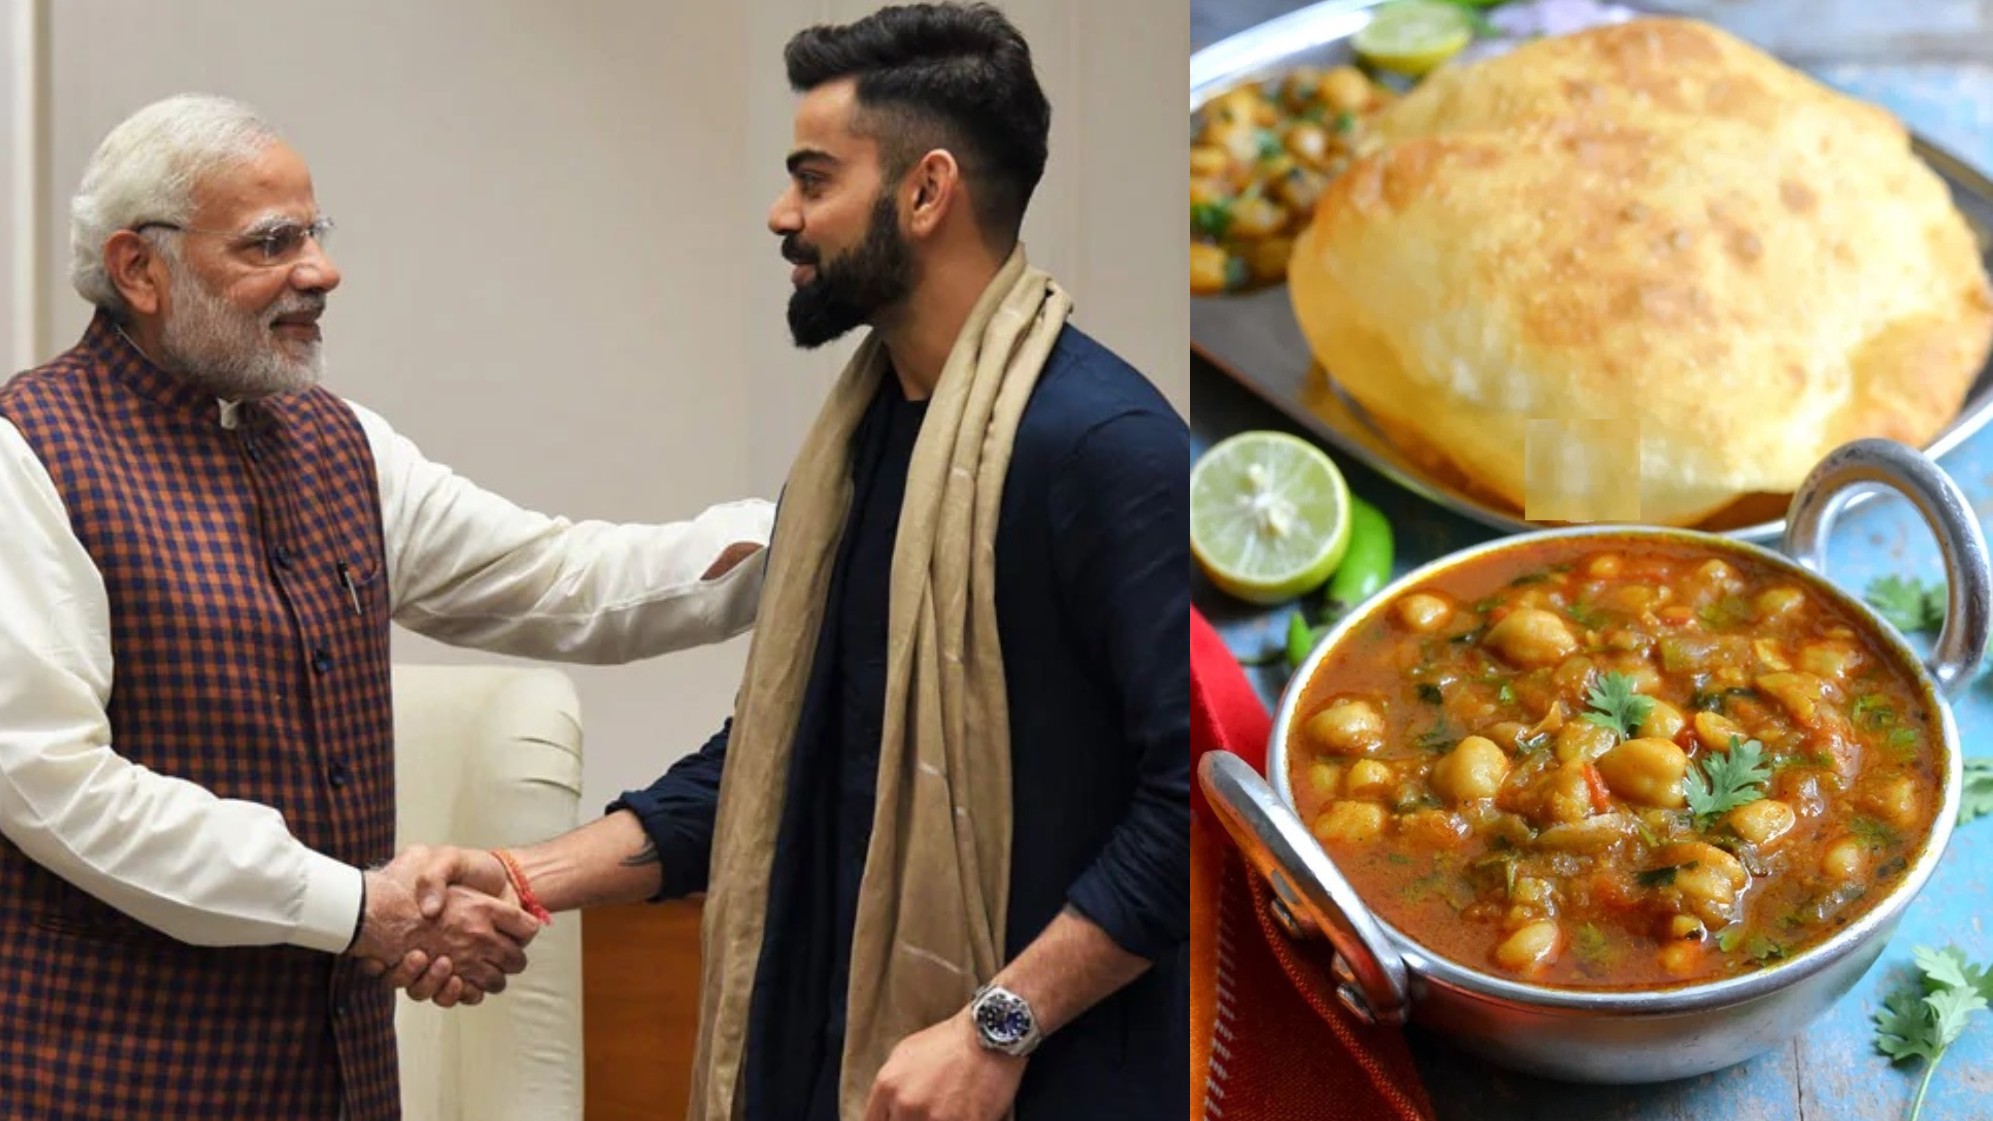 PM Modi asks Virat Kohli if Chole Bhature business in Delhi is suffering because of him